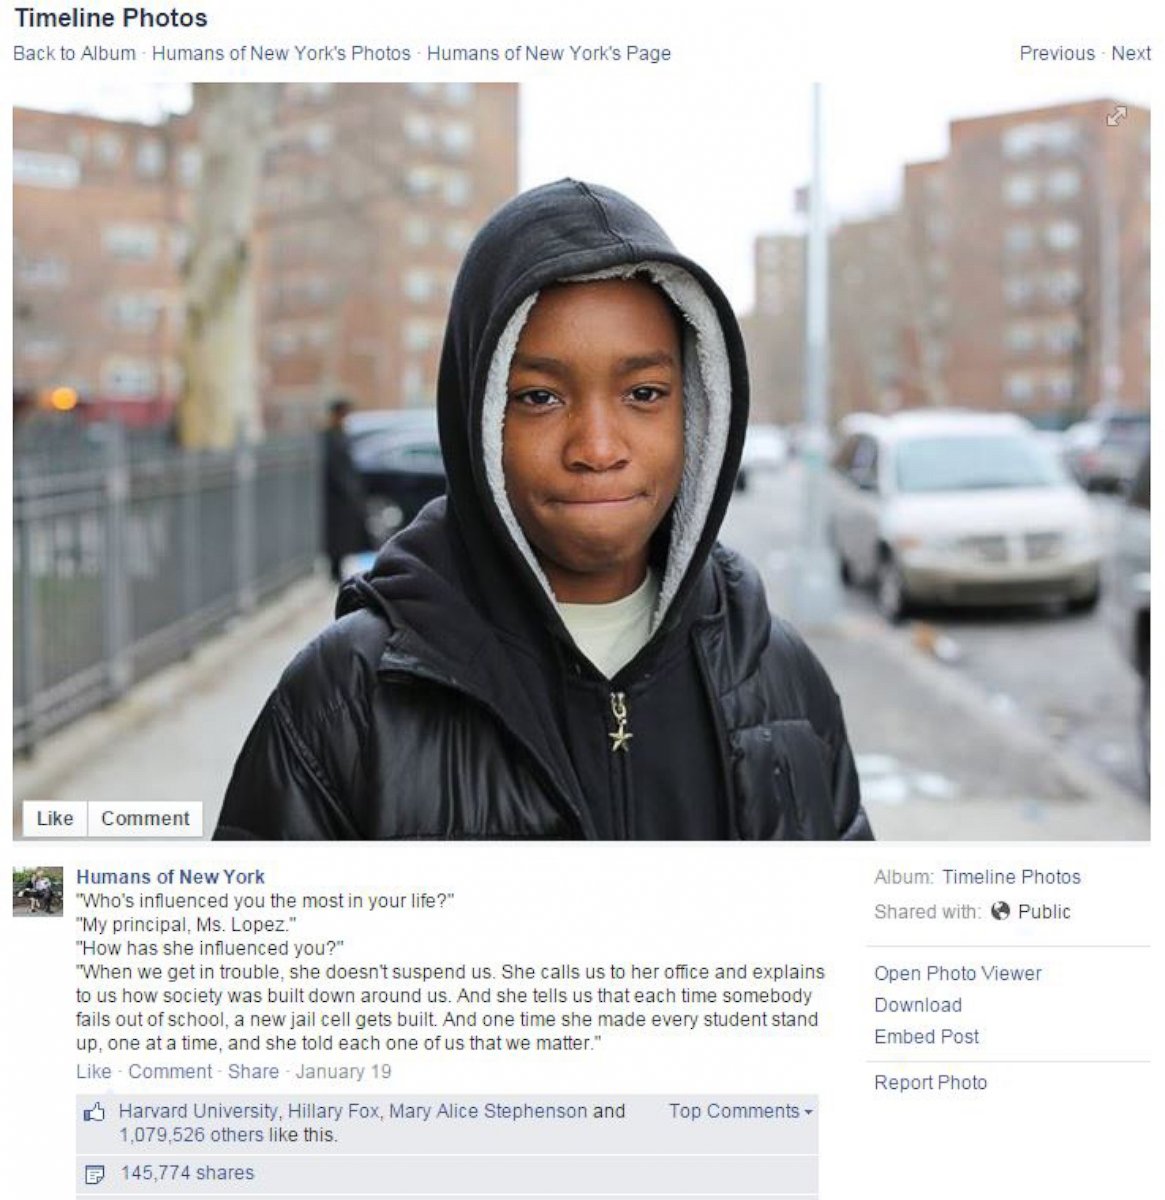 PHOTO: The post, featuring 13-year-old middle school student Vidal Chastanet from Brownsville, Brooklyn, has received over 1 million likes on Facebook and over 145,000 shares.